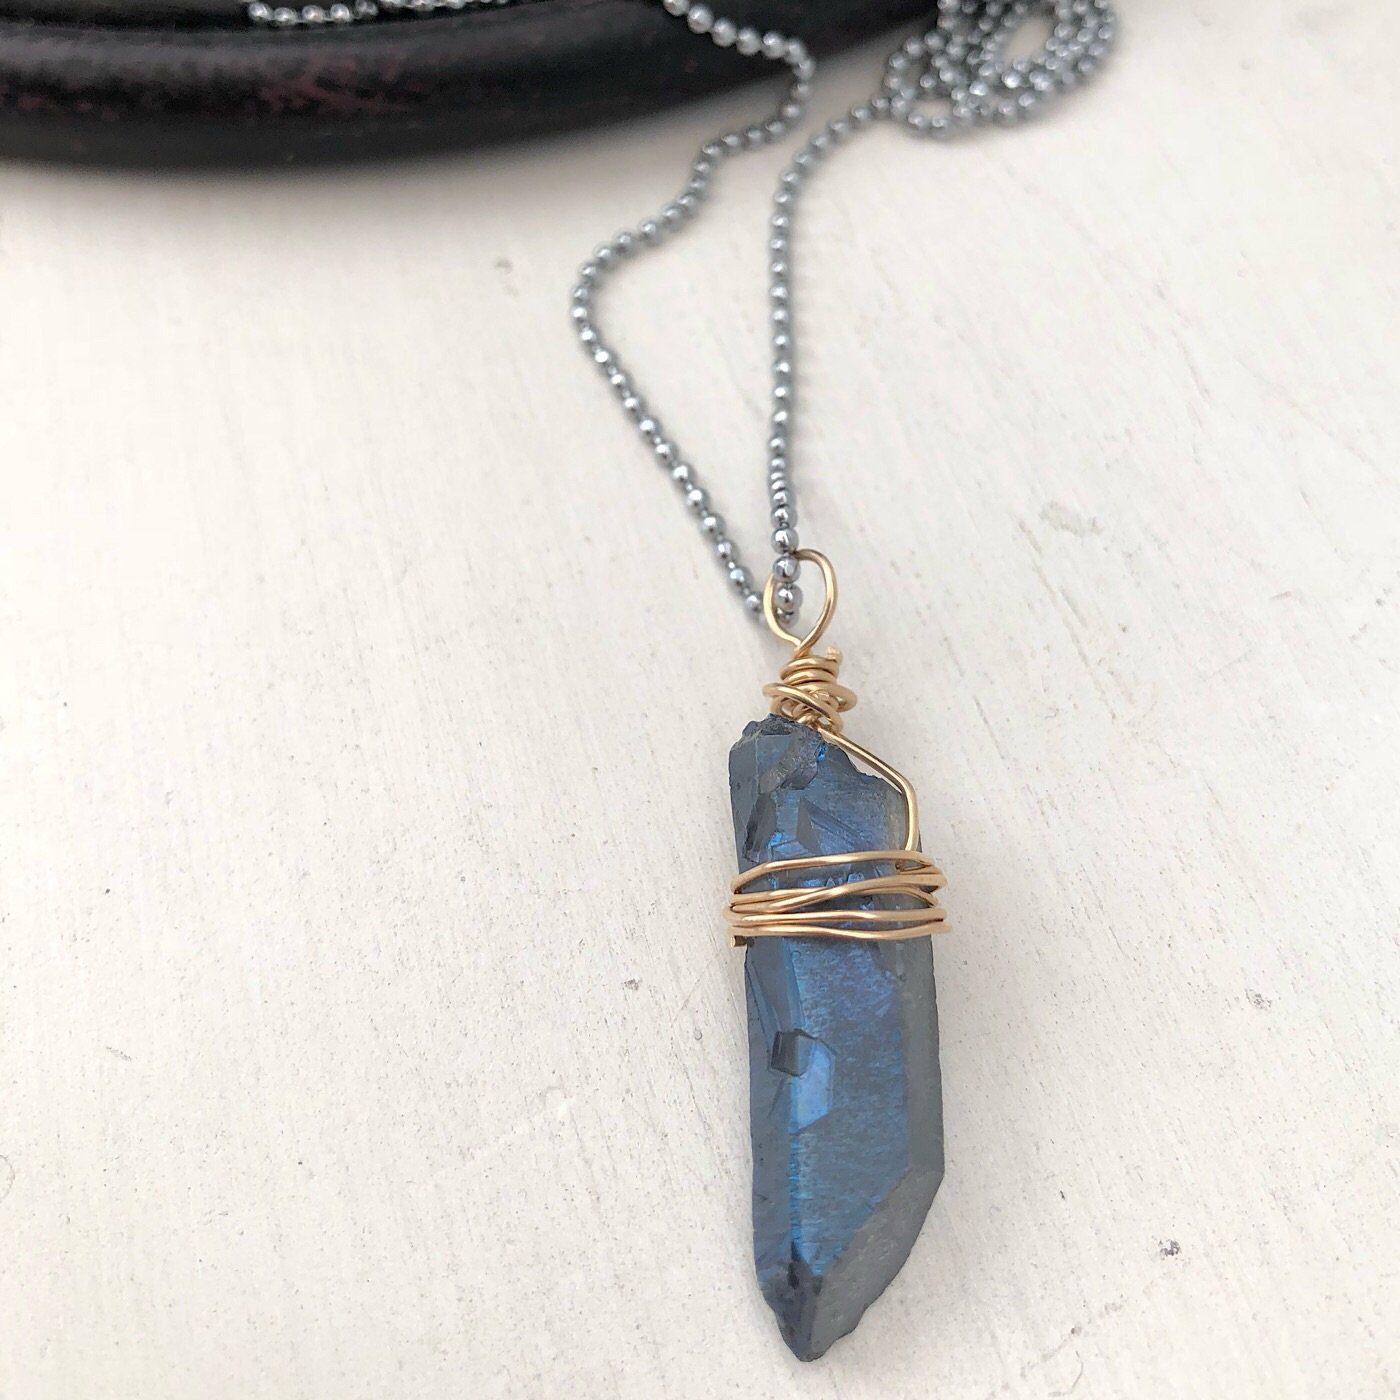 Raw Wrapped Crystal Necklace  - IsabelleGraceJewelry